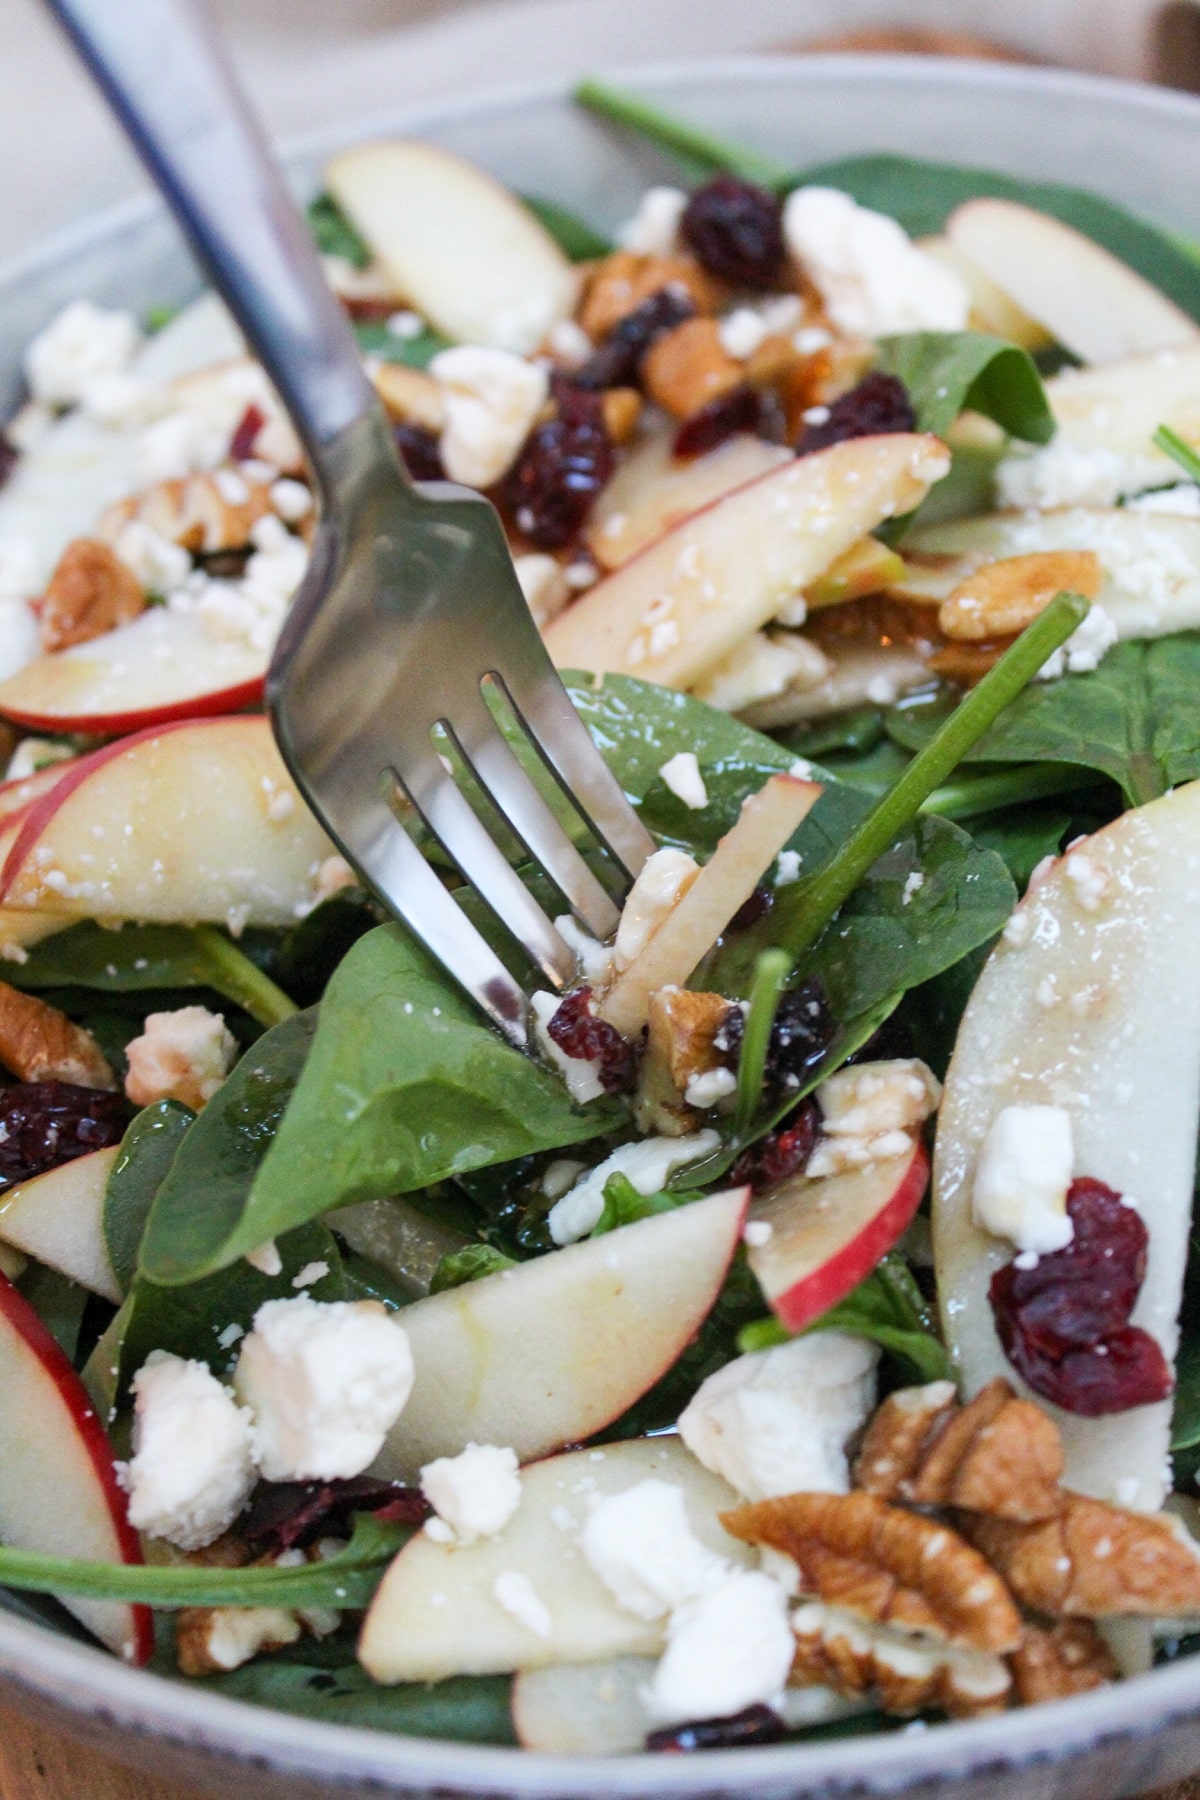 spinach in a gray bowl topped with sliced apples, pecans, crumbled feta cheese, and dried cranberries. Eaten from the bowl with a fork.